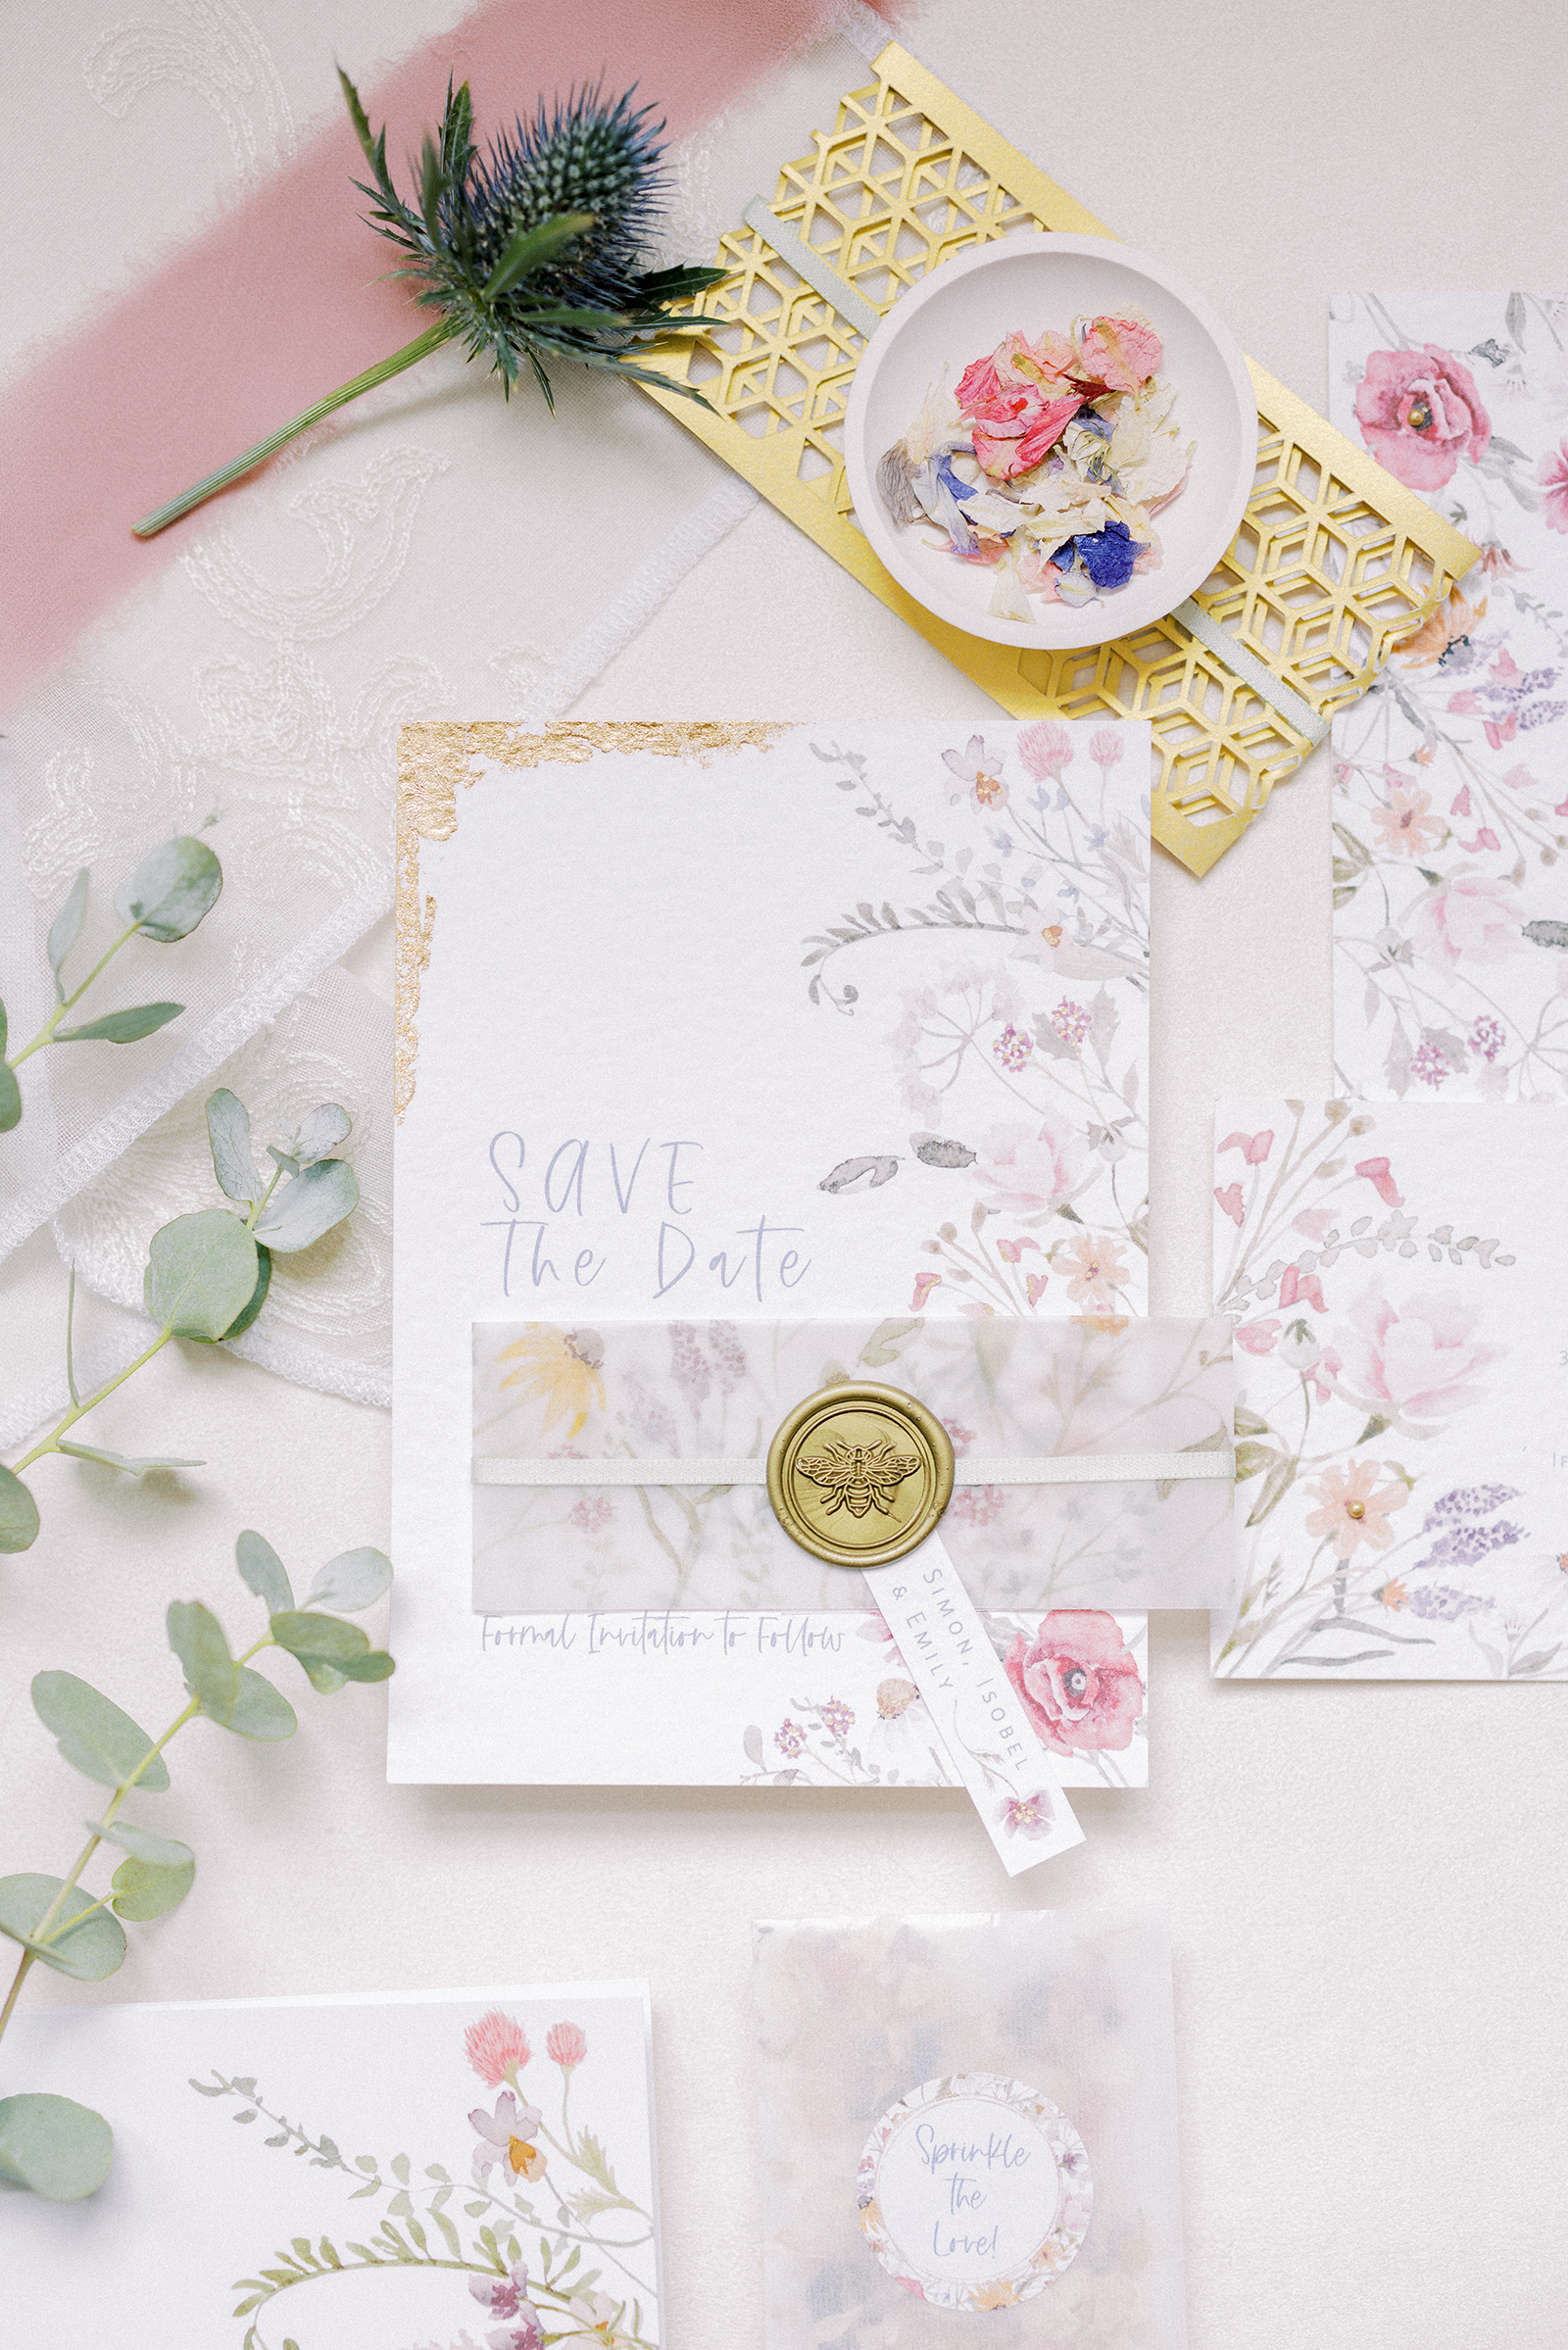 Hand made Wedding Stationery with a Bee theme for South Stoke Barn Wedding